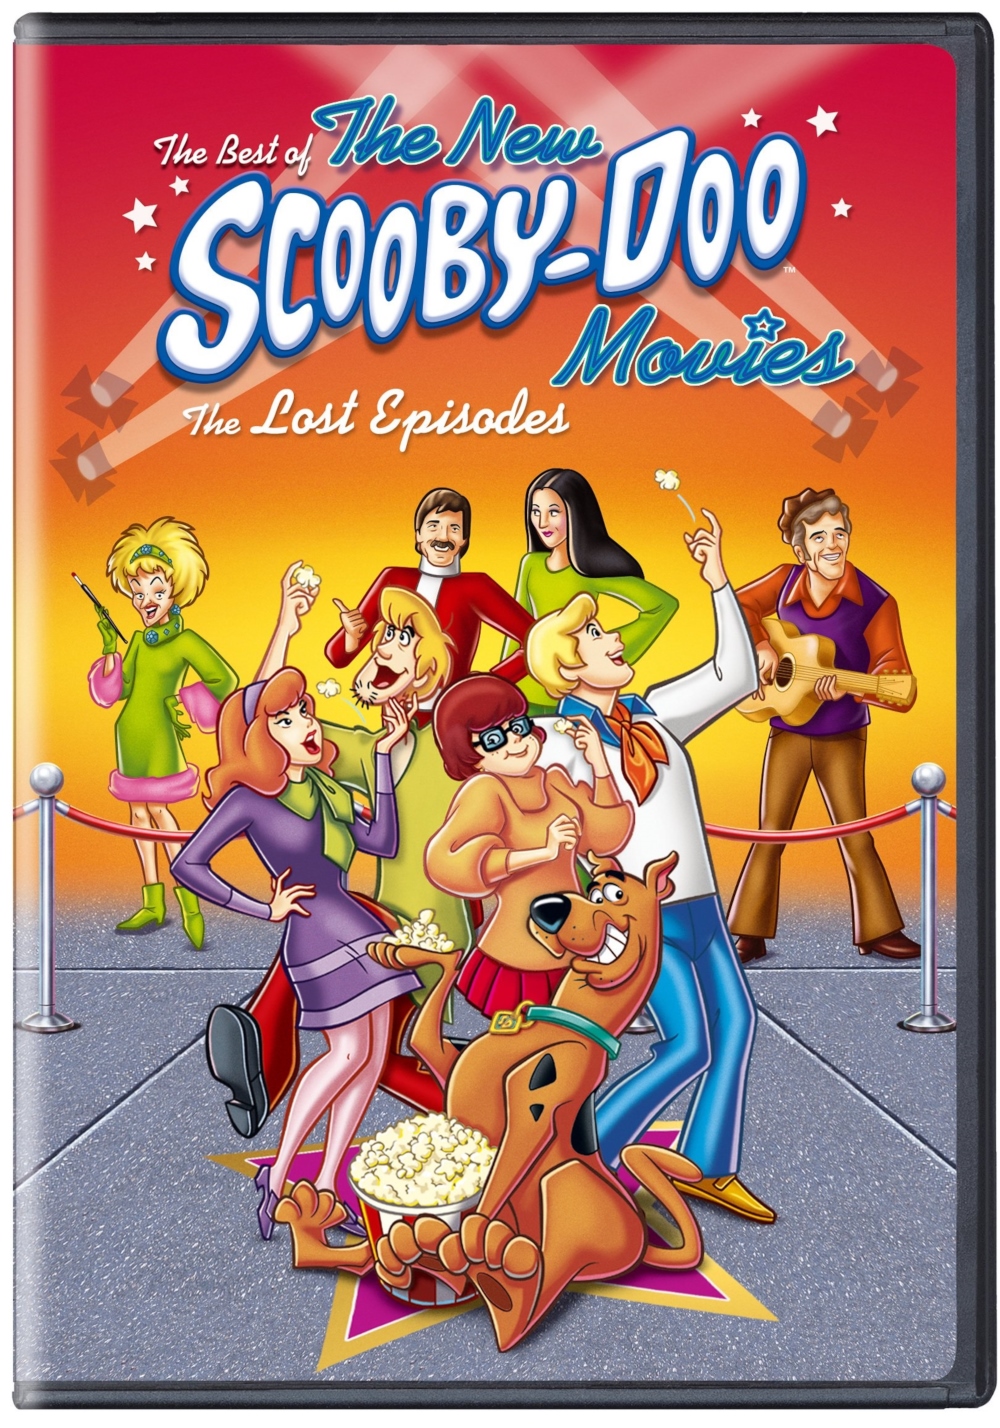 Scooby-Doo Lost Episodes